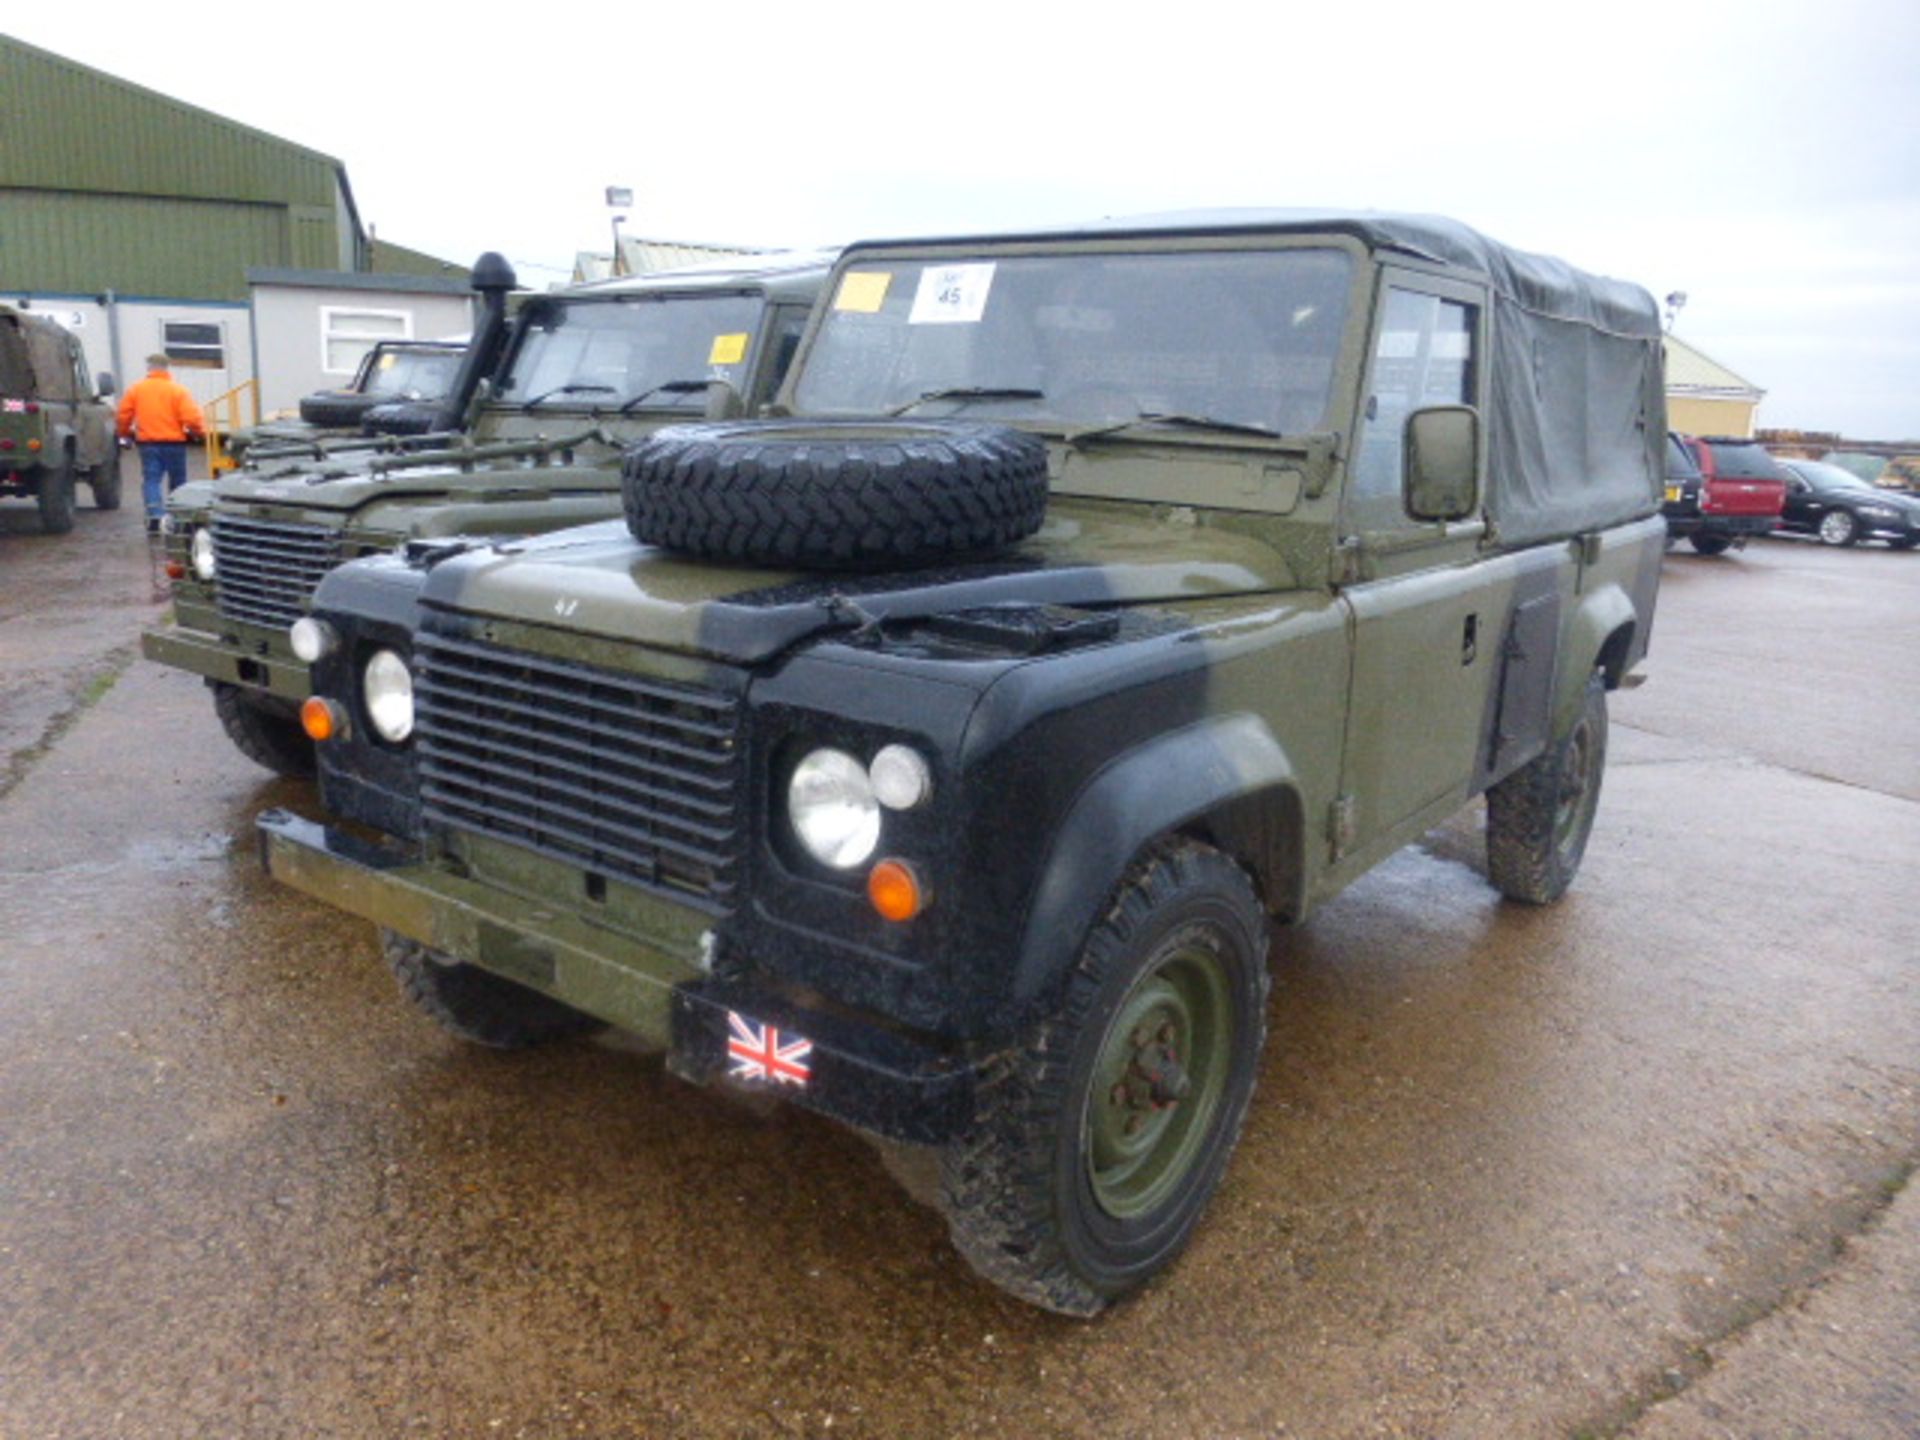 Land Rover 110 soft top with rear seats, RHD, 2.5 N/A diesel engine, Wolf wheels, etc. 22,000 KMs. - Image 2 of 4